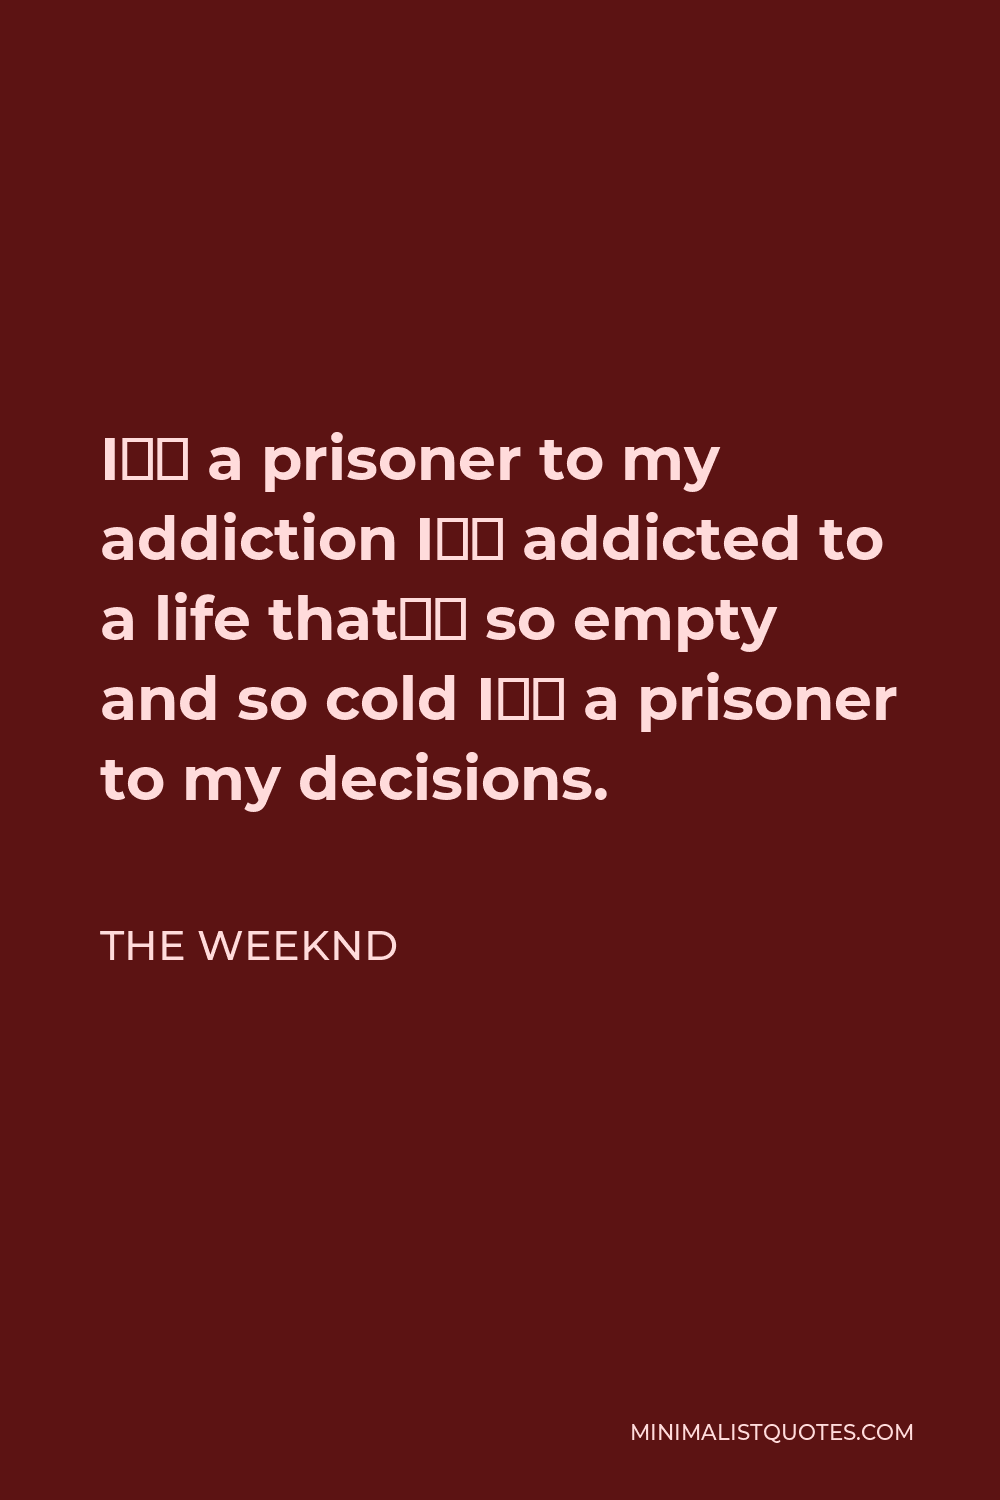 The Weeknd Quote - I’m a prisoner to my addiction I’m addicted to a life that’s so empty and so cold I’m a prisoner to my decisions.